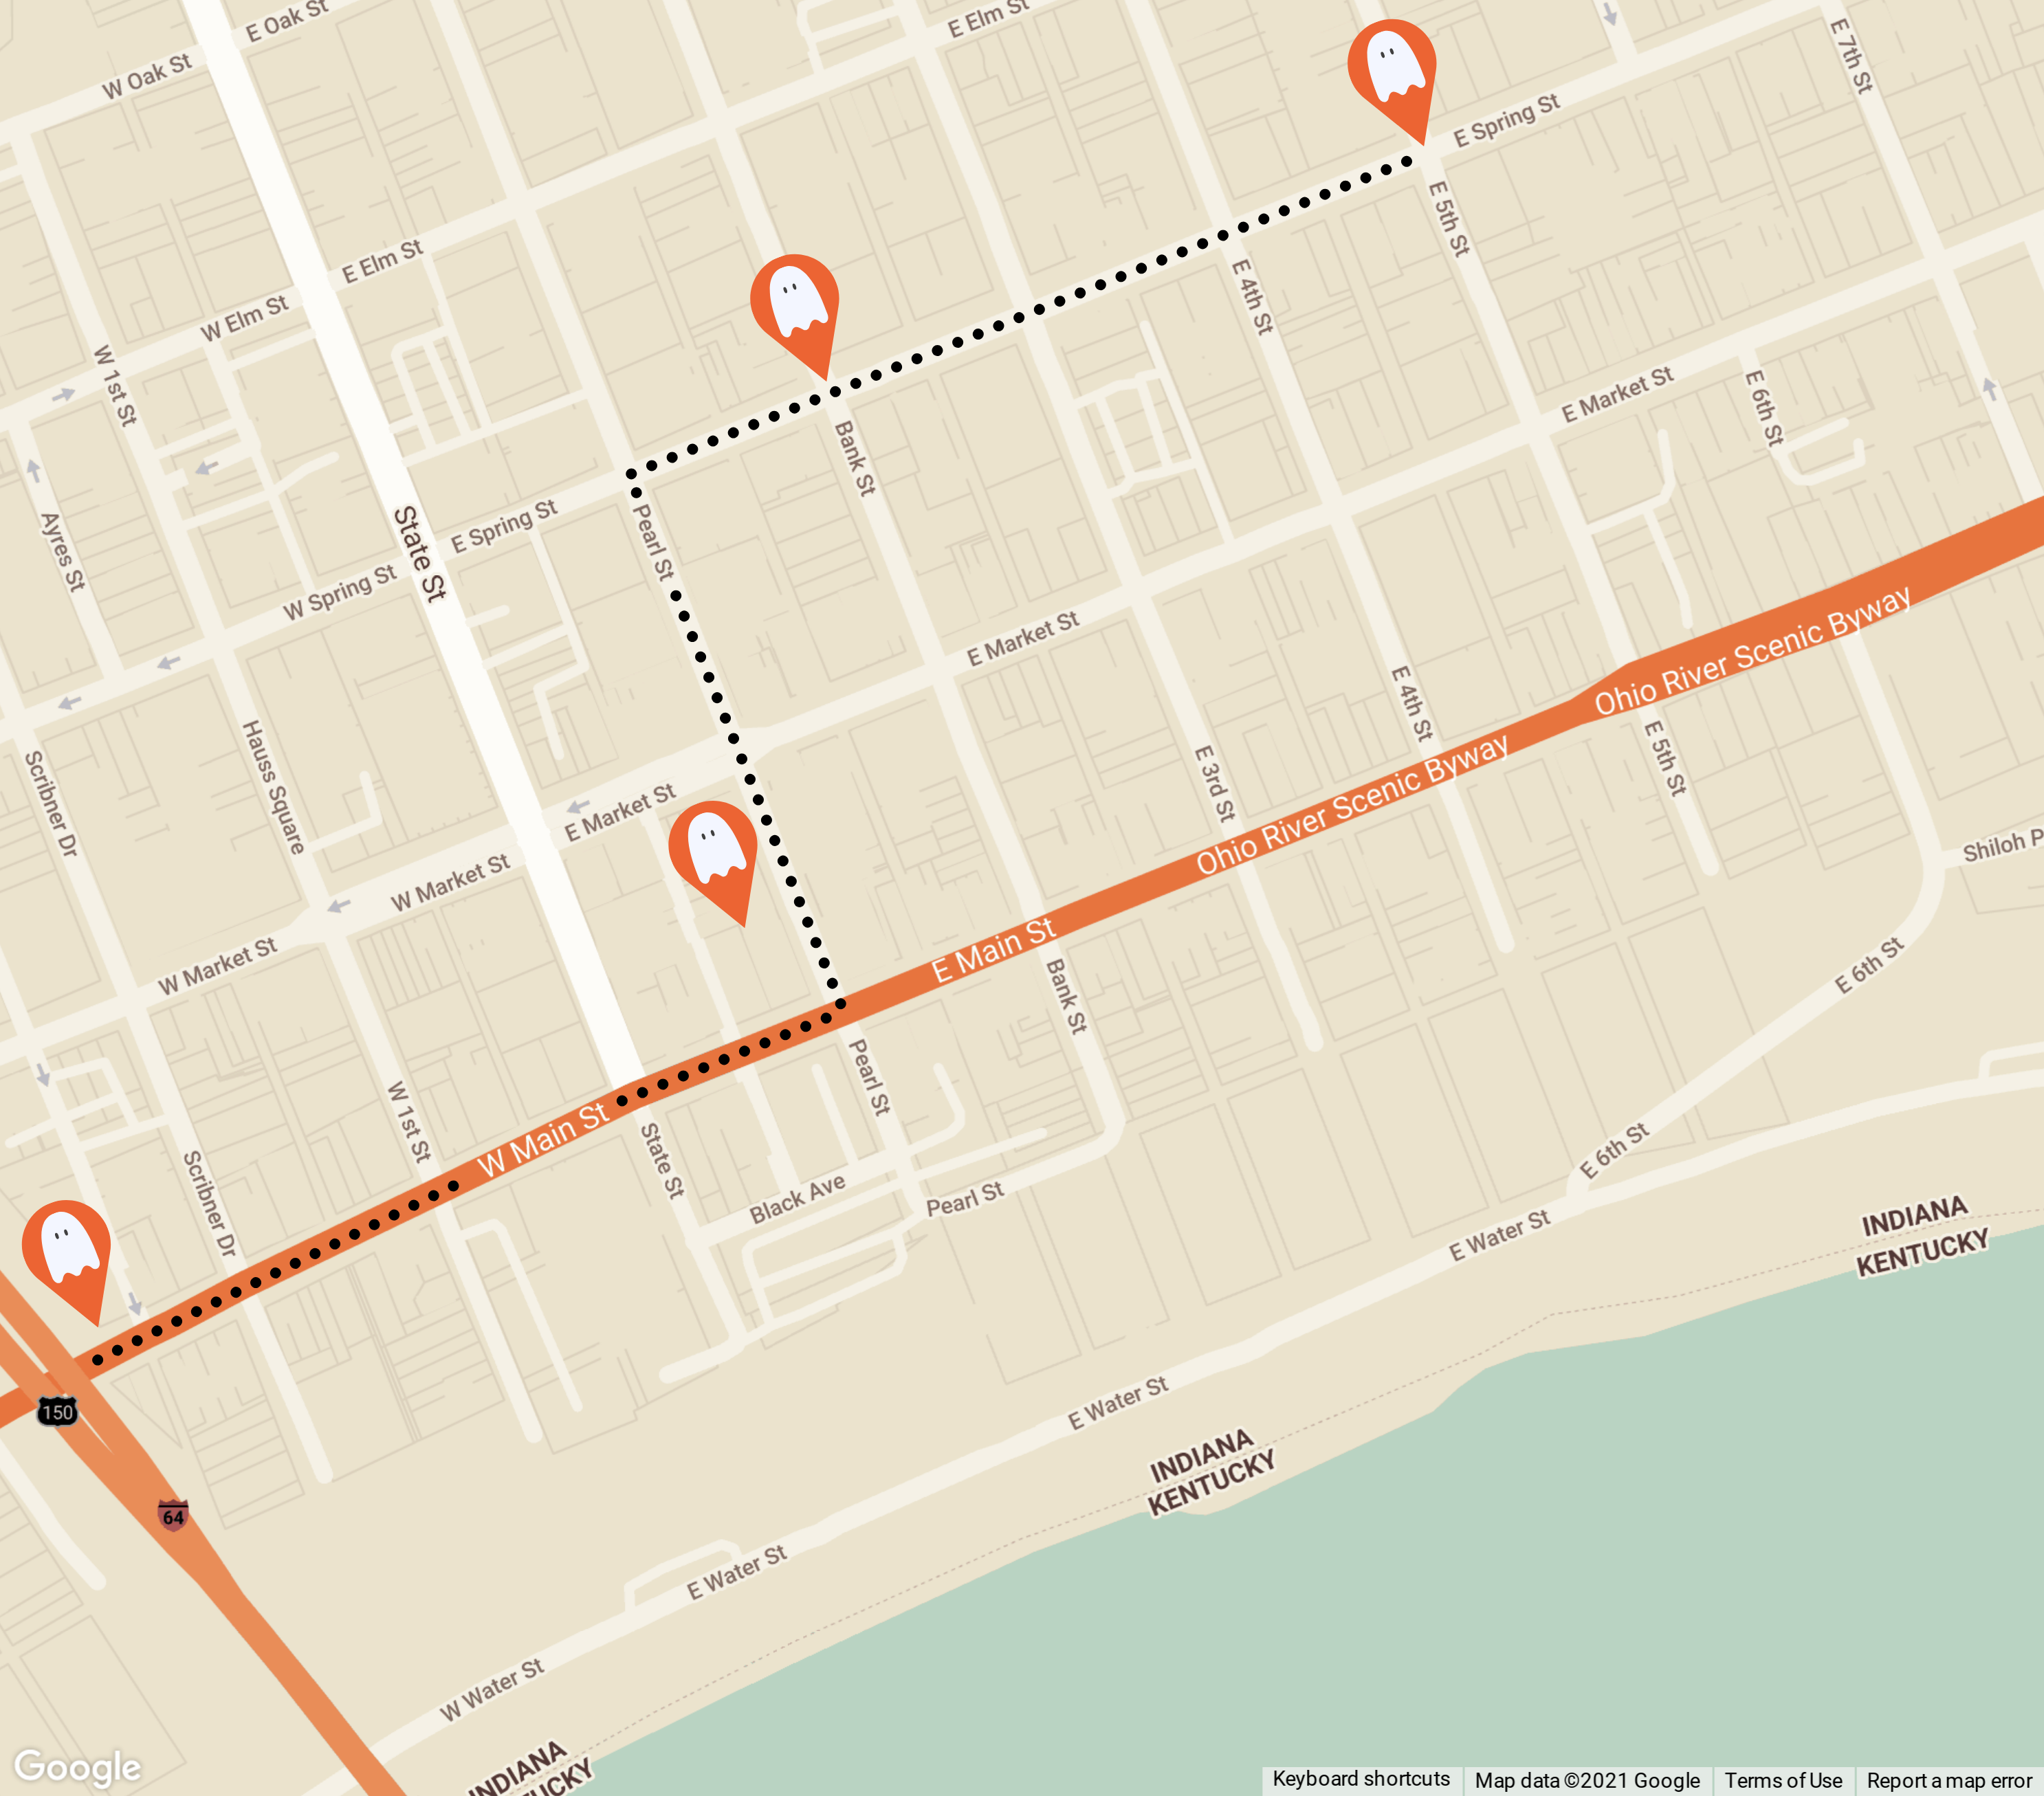 Ghost Walk Map detailing locations mentioned in post.